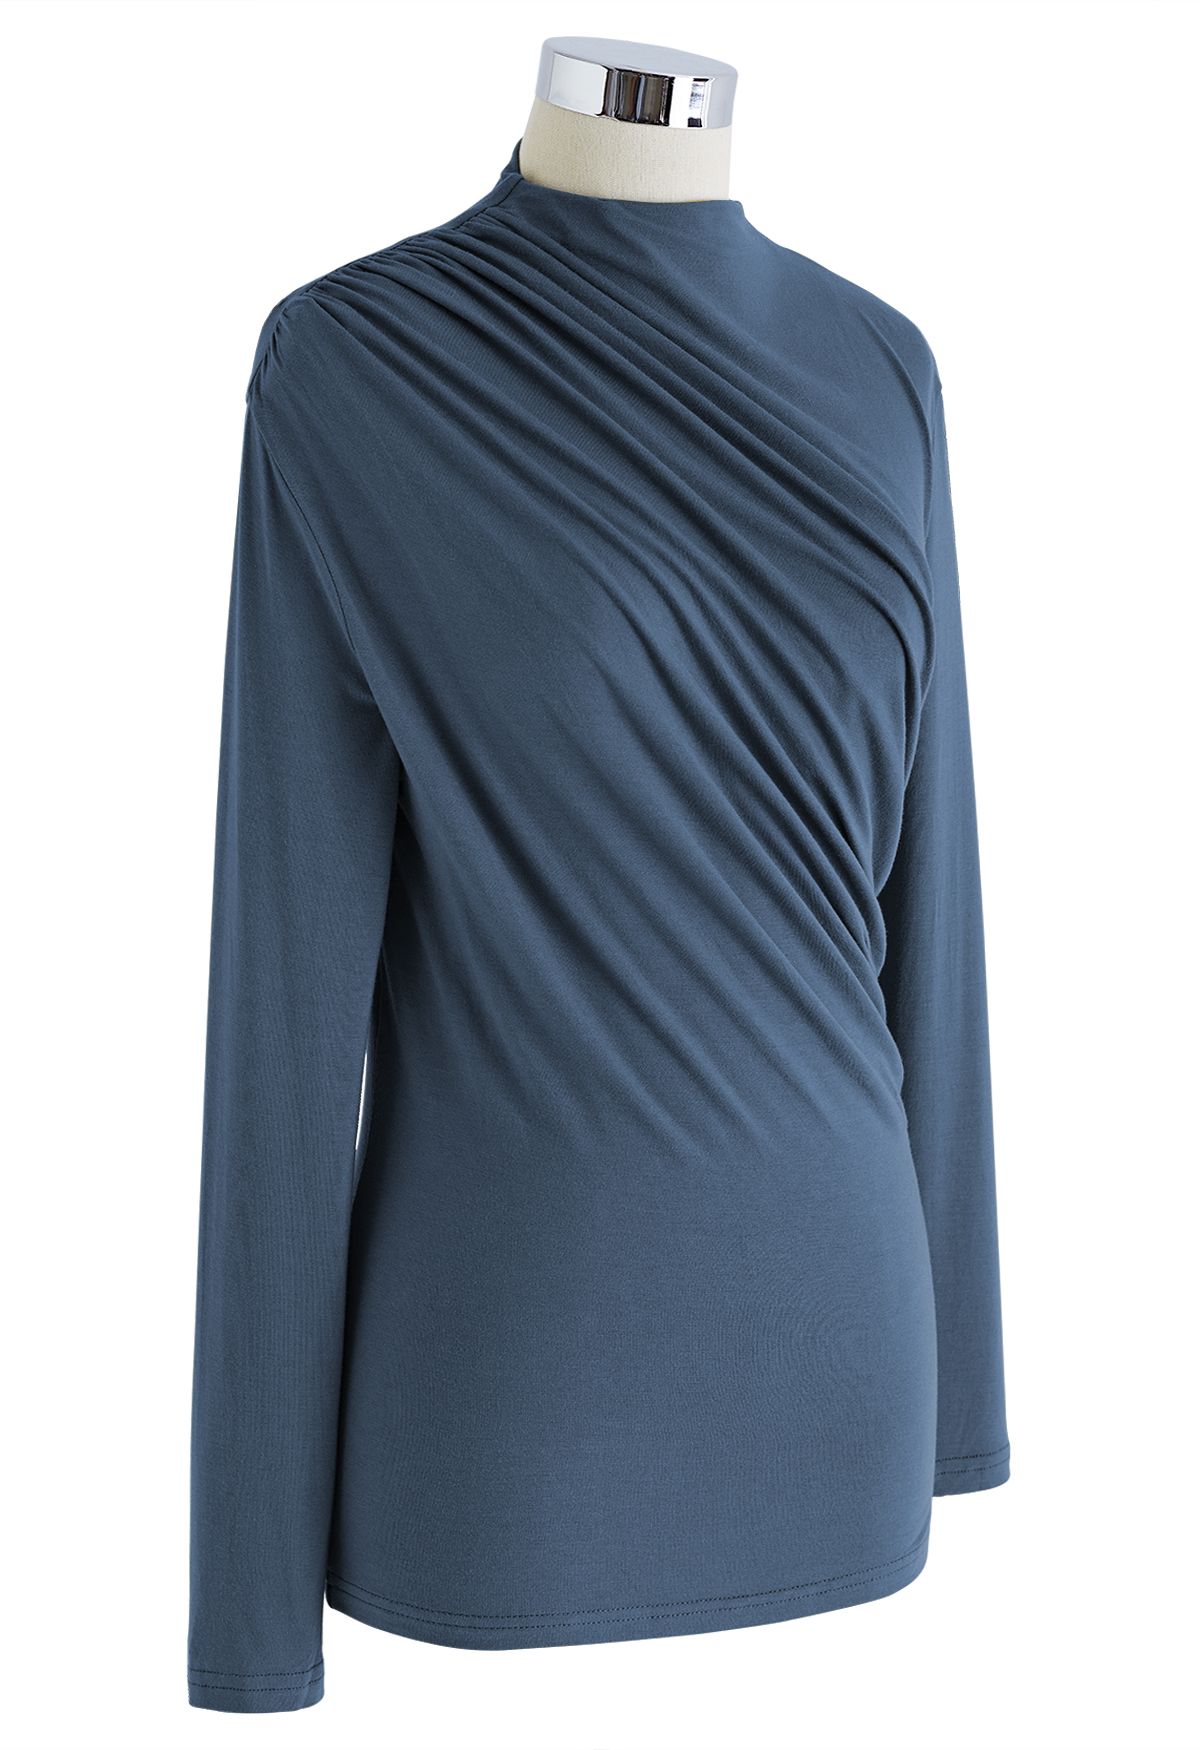 Ruched Long Sleeves Top in Teal